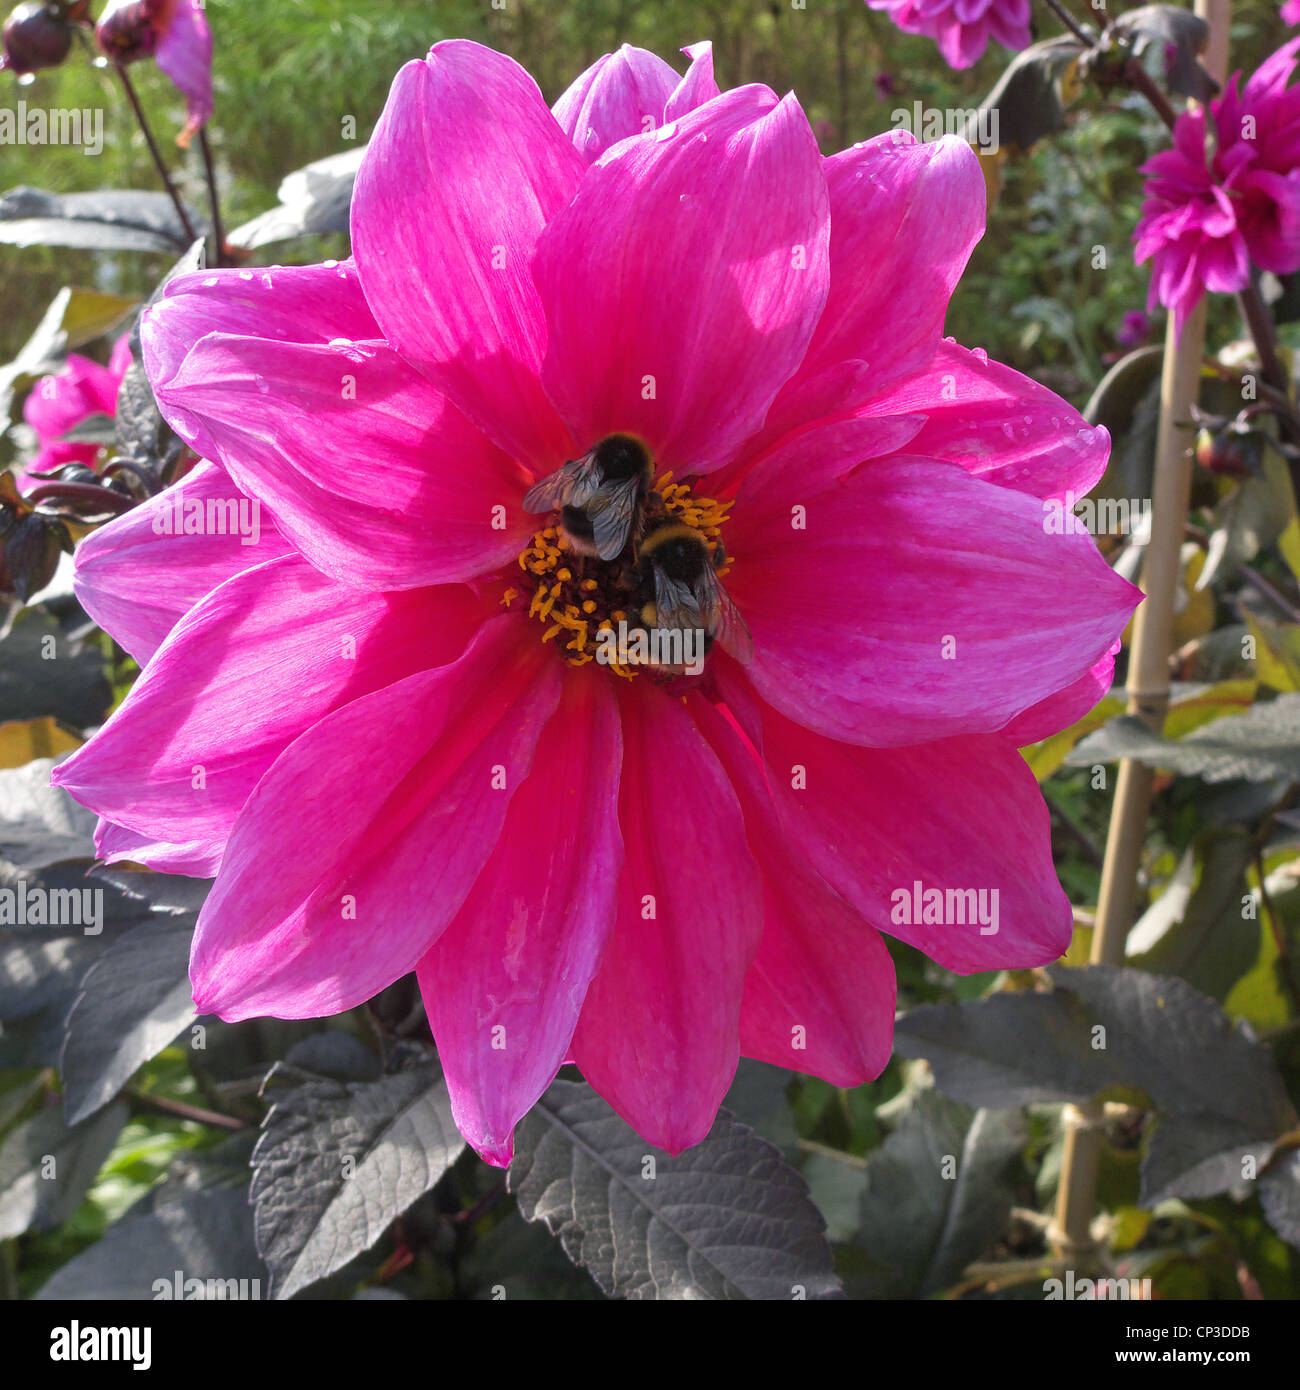 Bumblebees Pollinating a Pink Dahlia Flower Stock Photo